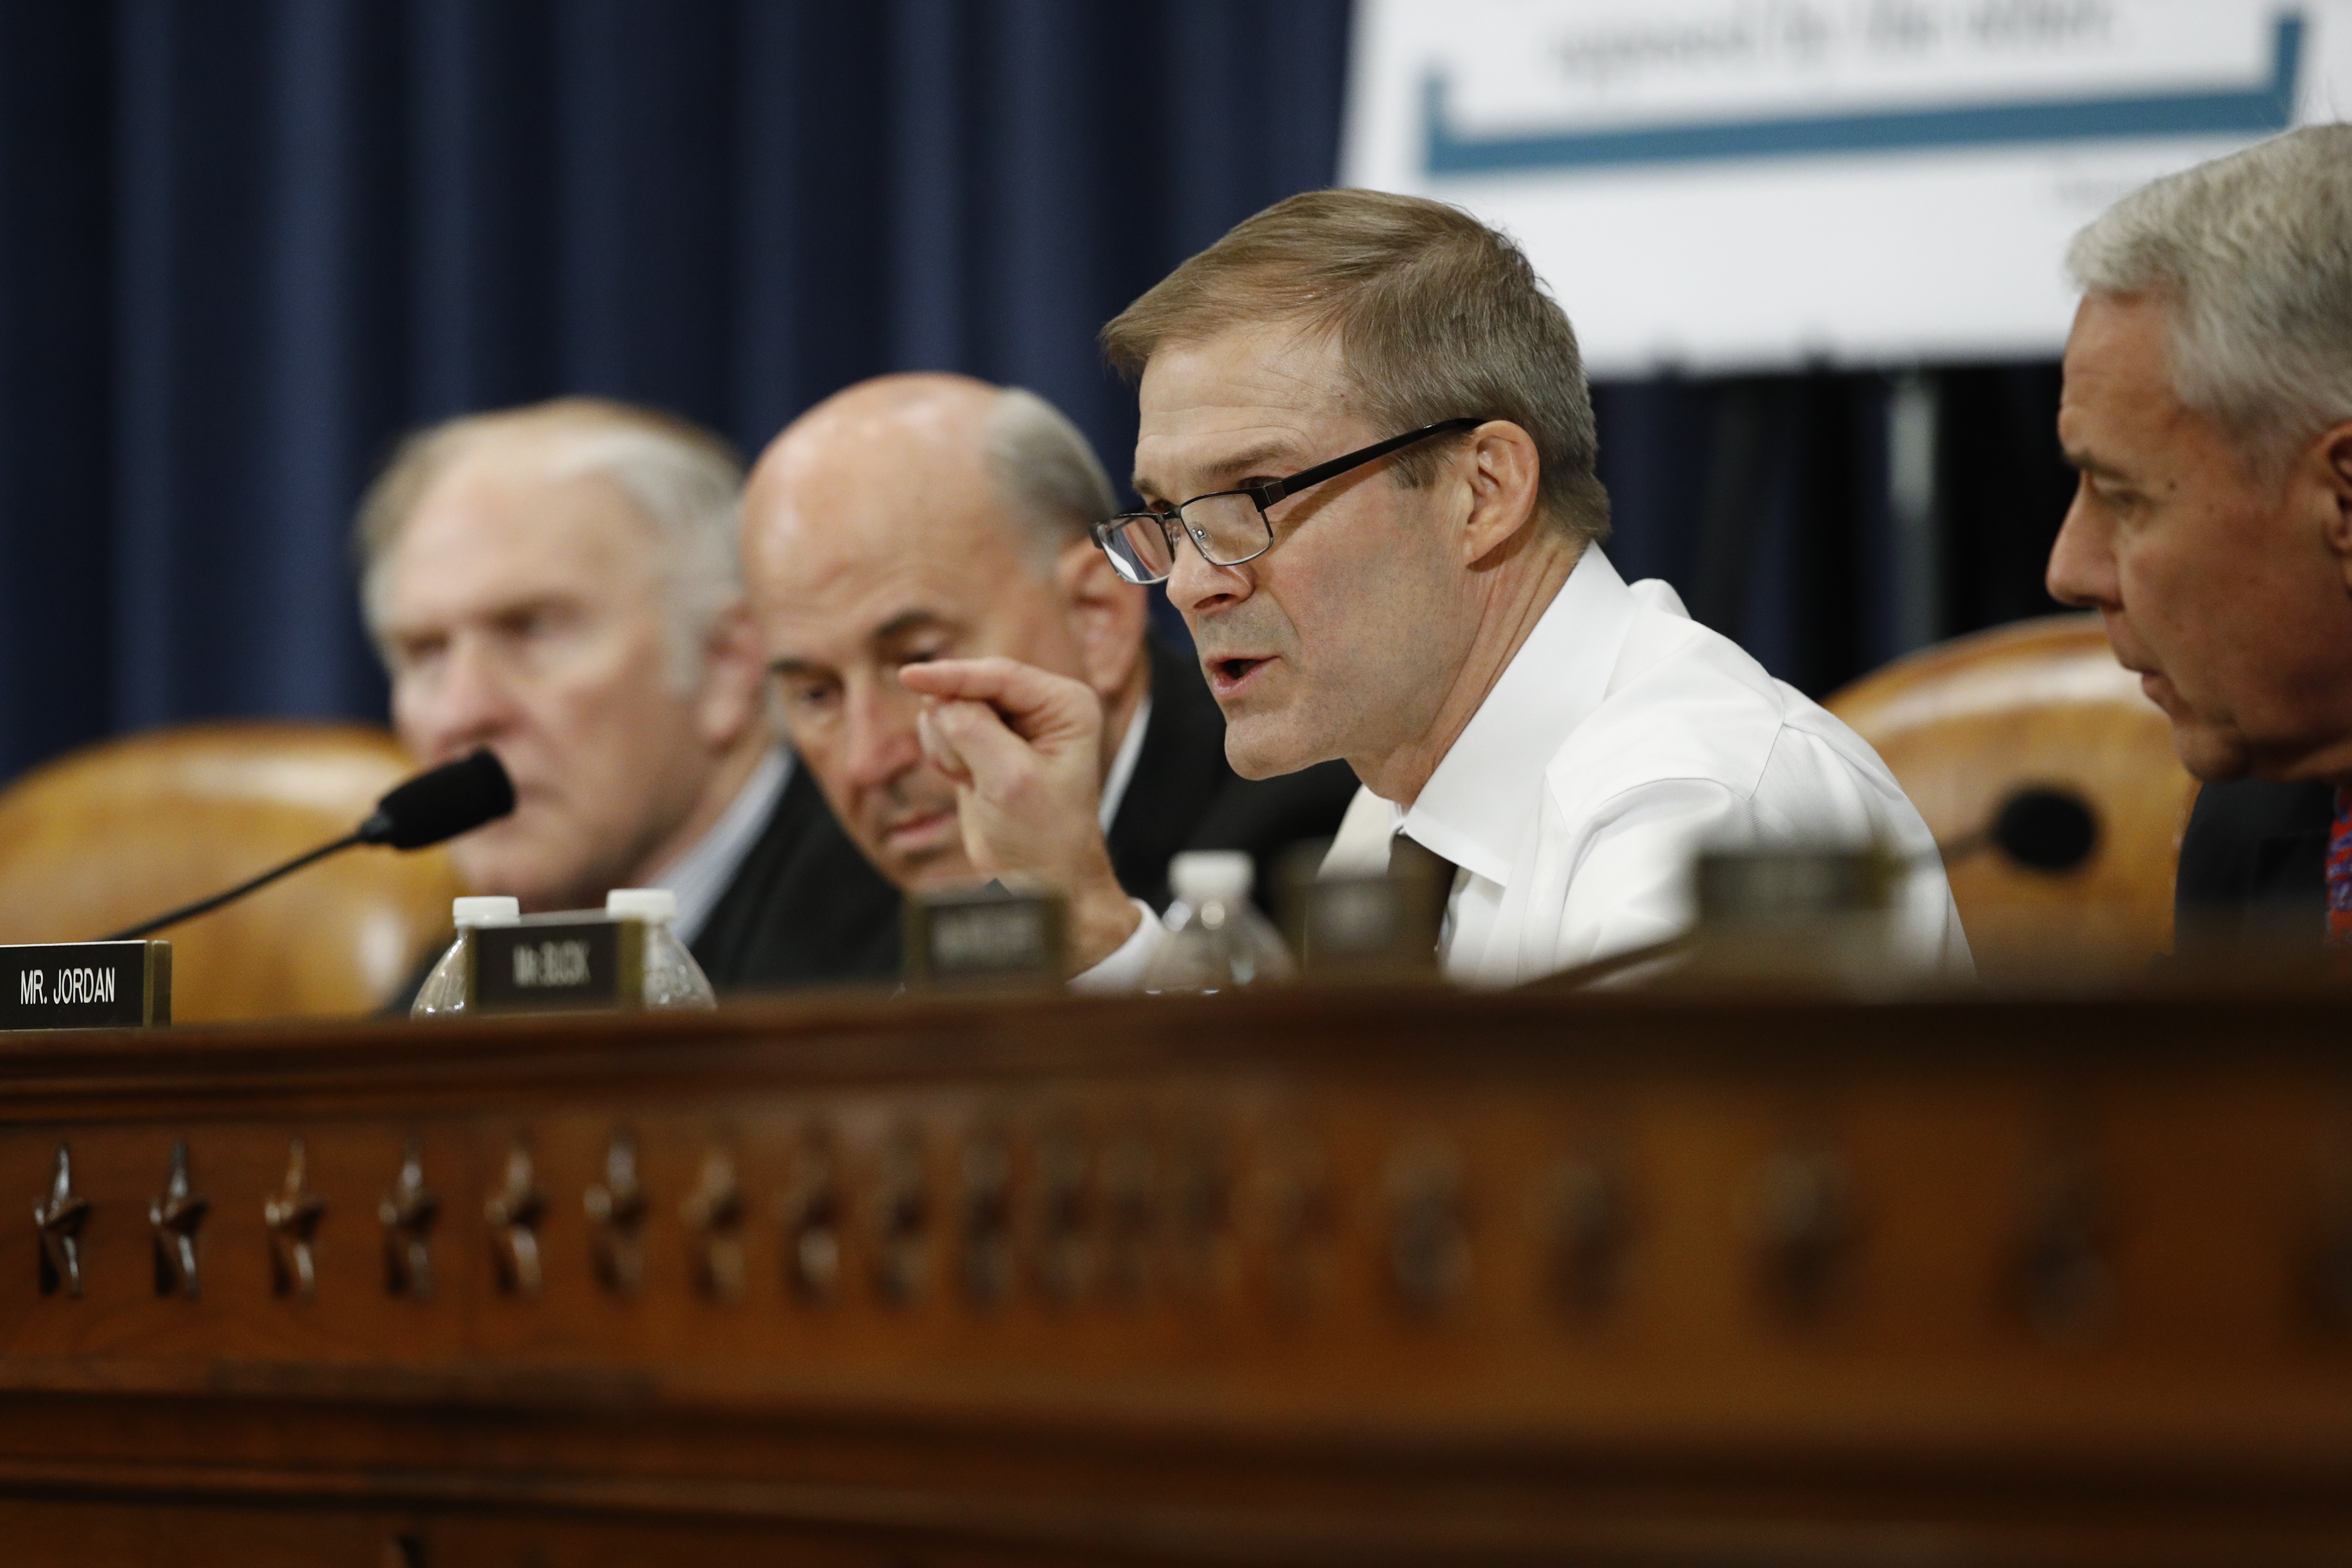 Rep. Jim Jordan, R-Ohio gives his opening statement during a House Judiciary Committee markup of the articles of impeachment against President Donald Trump, on Wednesday.